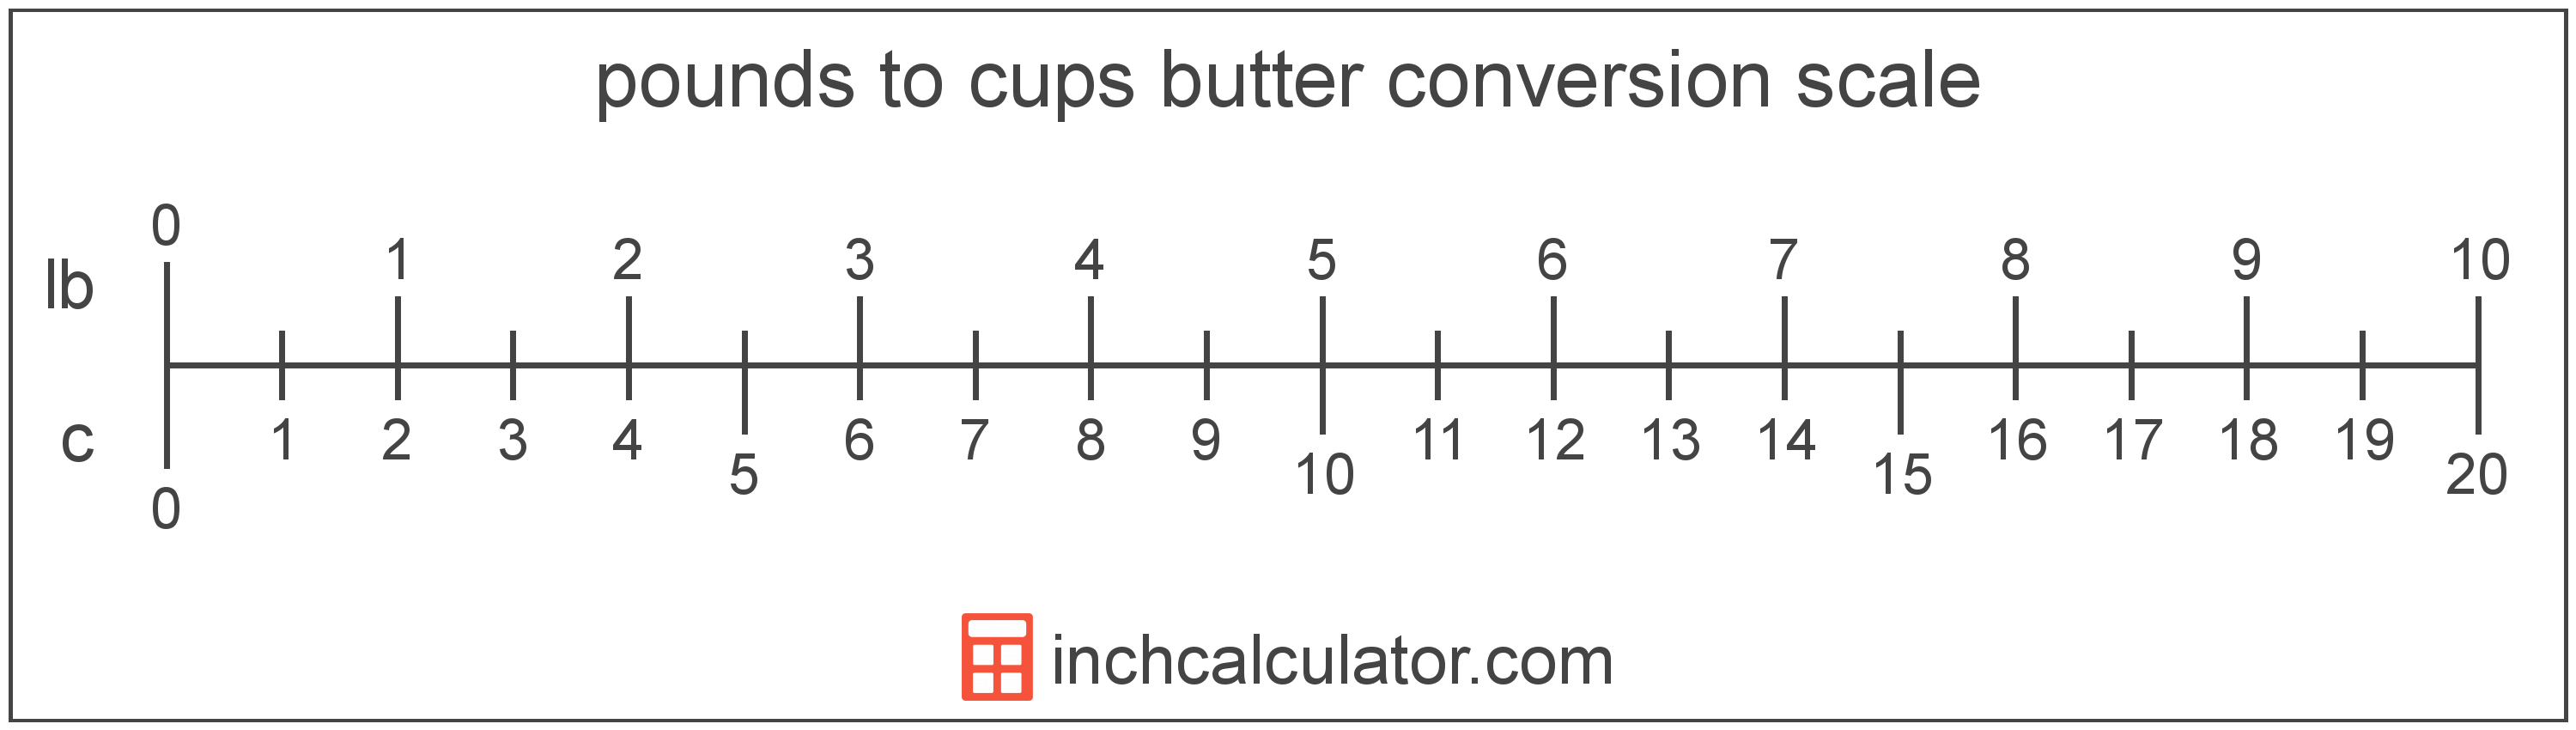 conversion scale showing cups and equivalent pounds butter values